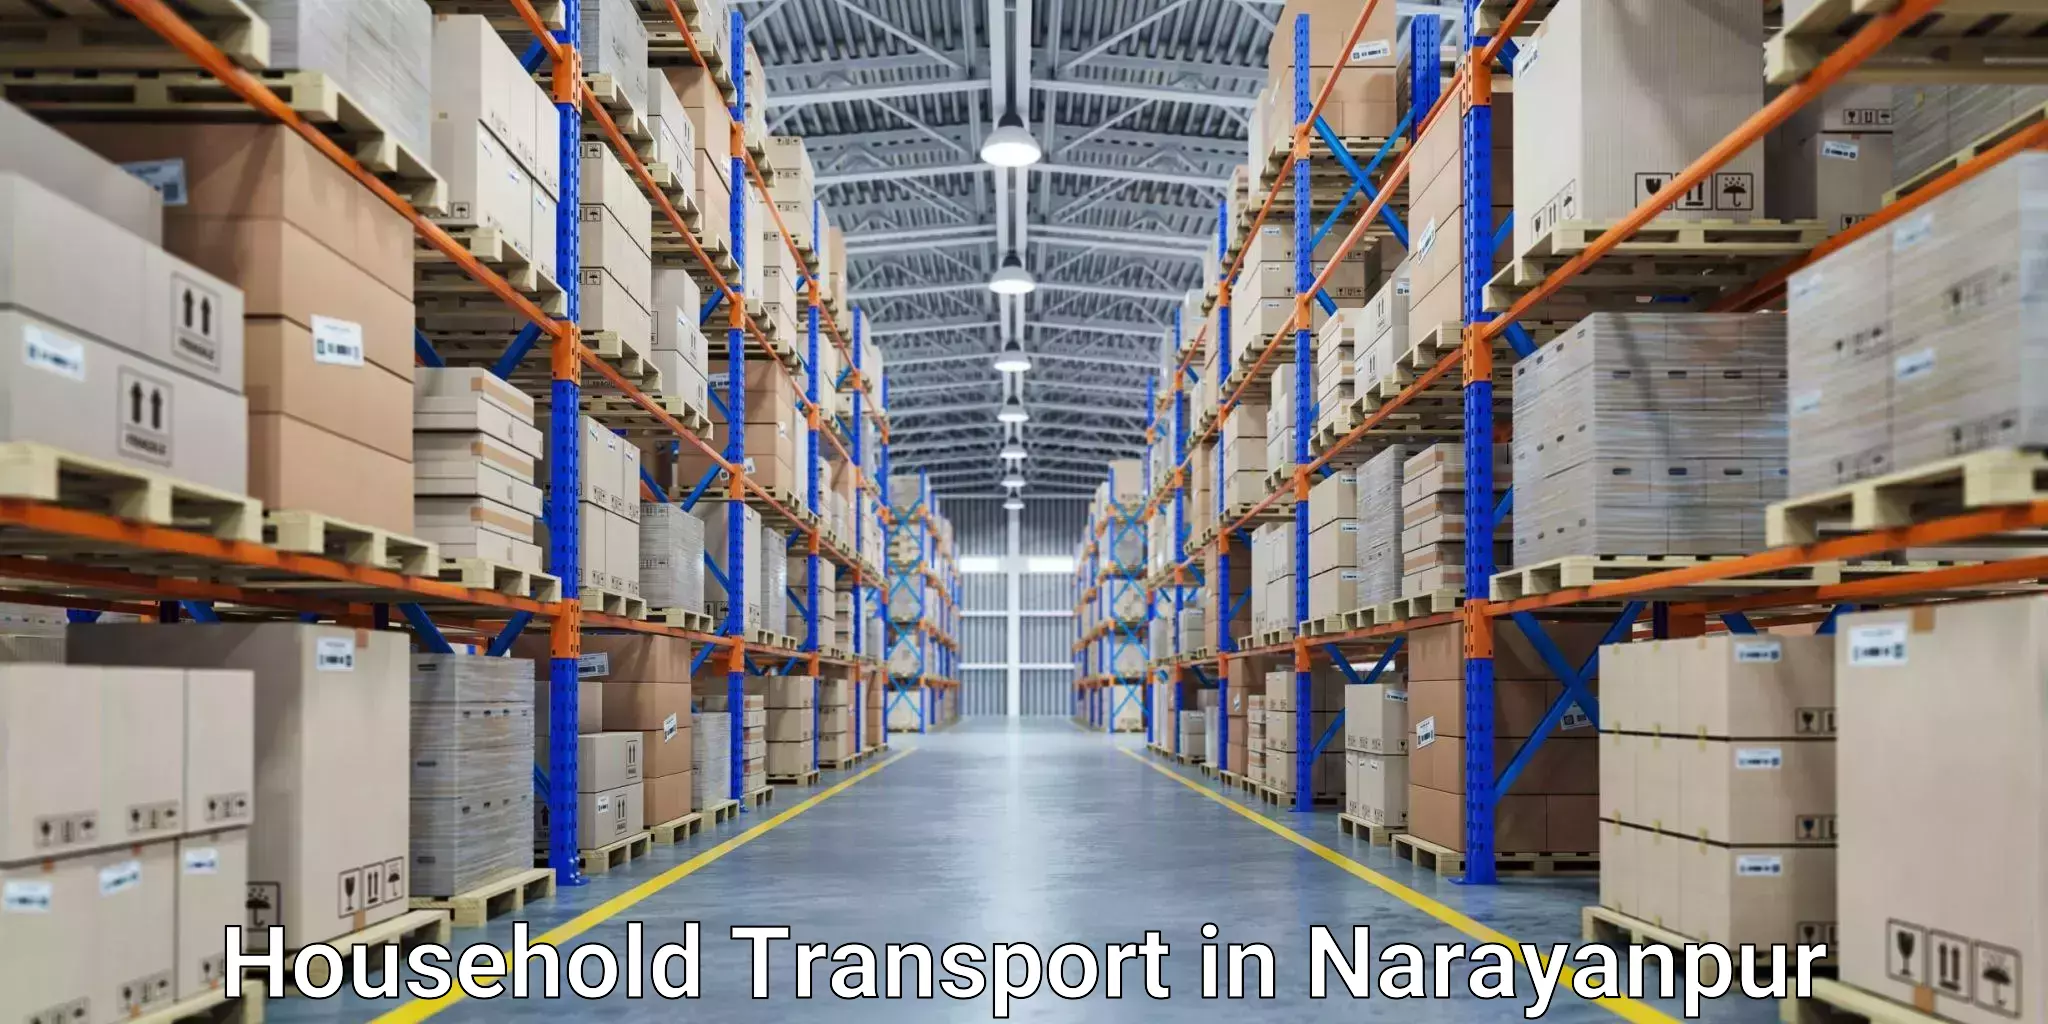 Reliable goods transport in Narayanpur